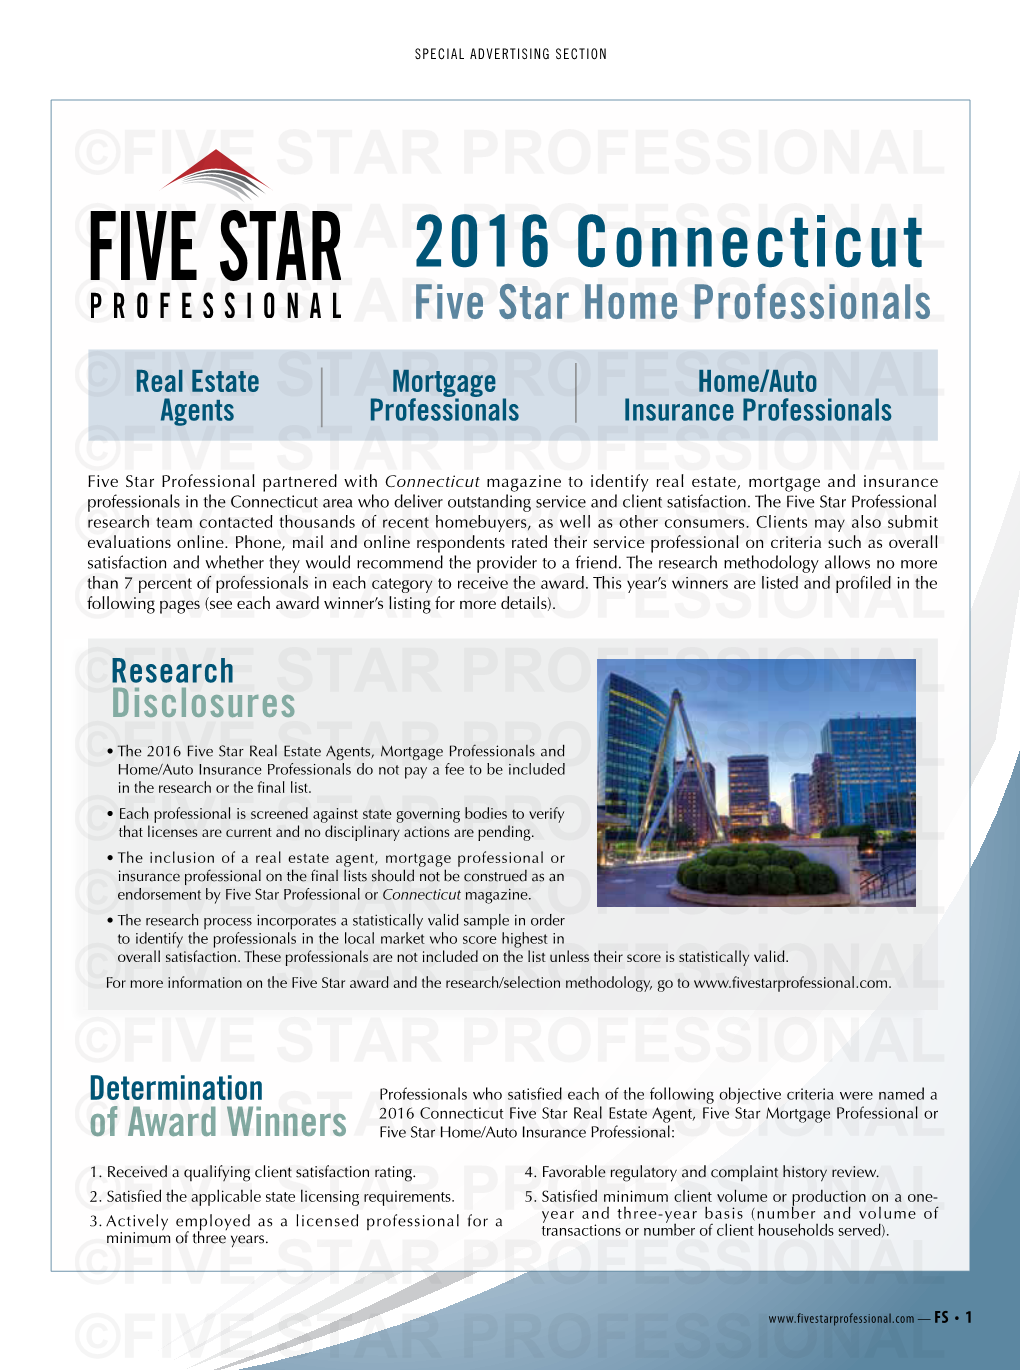 2016 Connecticut Five Star Real Estate Agent, Five Star Mortgage Professional Or ©Fiveof Award Winners Starfive Star Home/Auto PROFESSIONAL Insurance Professional: 1